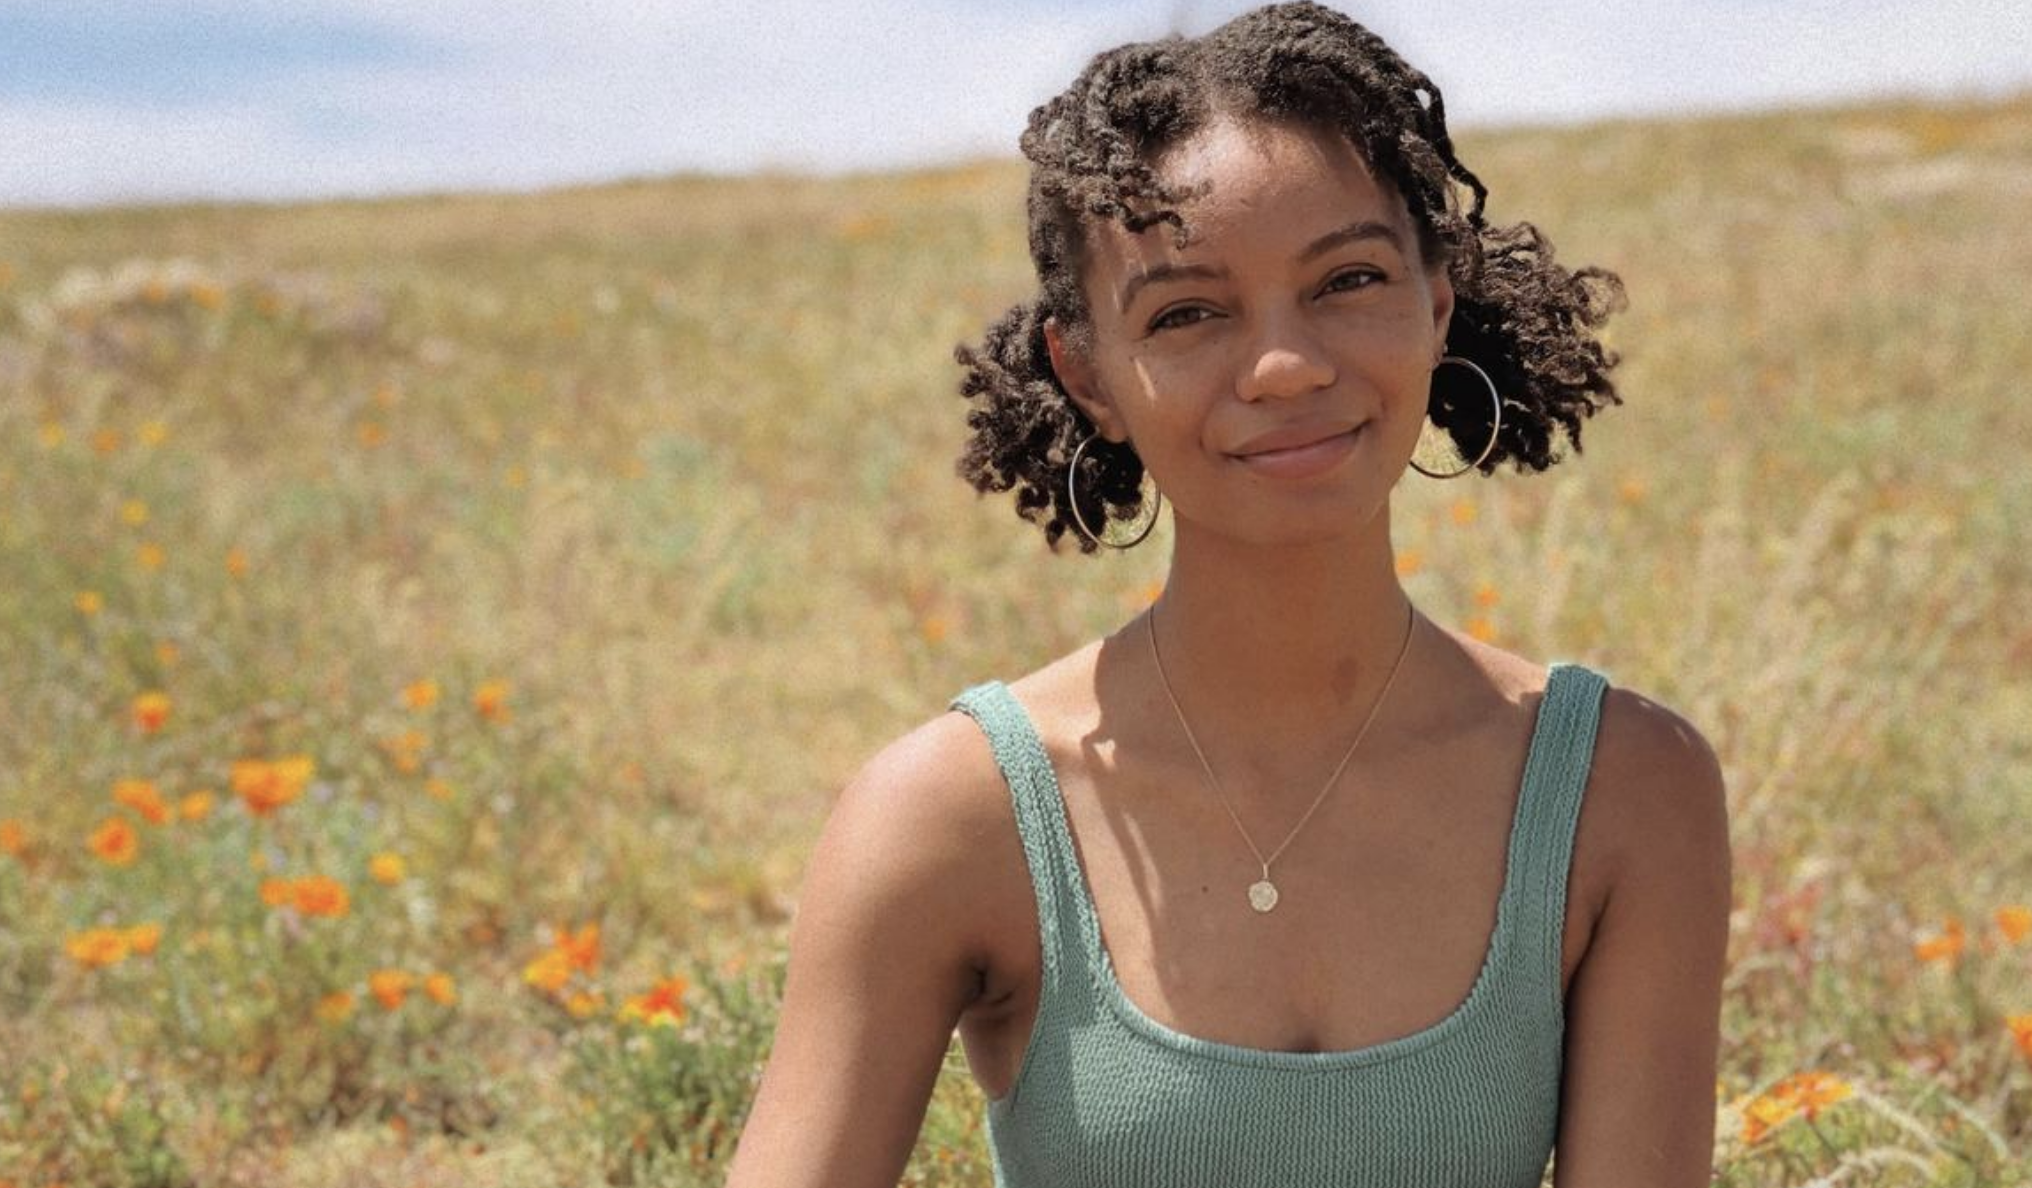 Leah Thomas smiles in front of a field of flowers and grasses